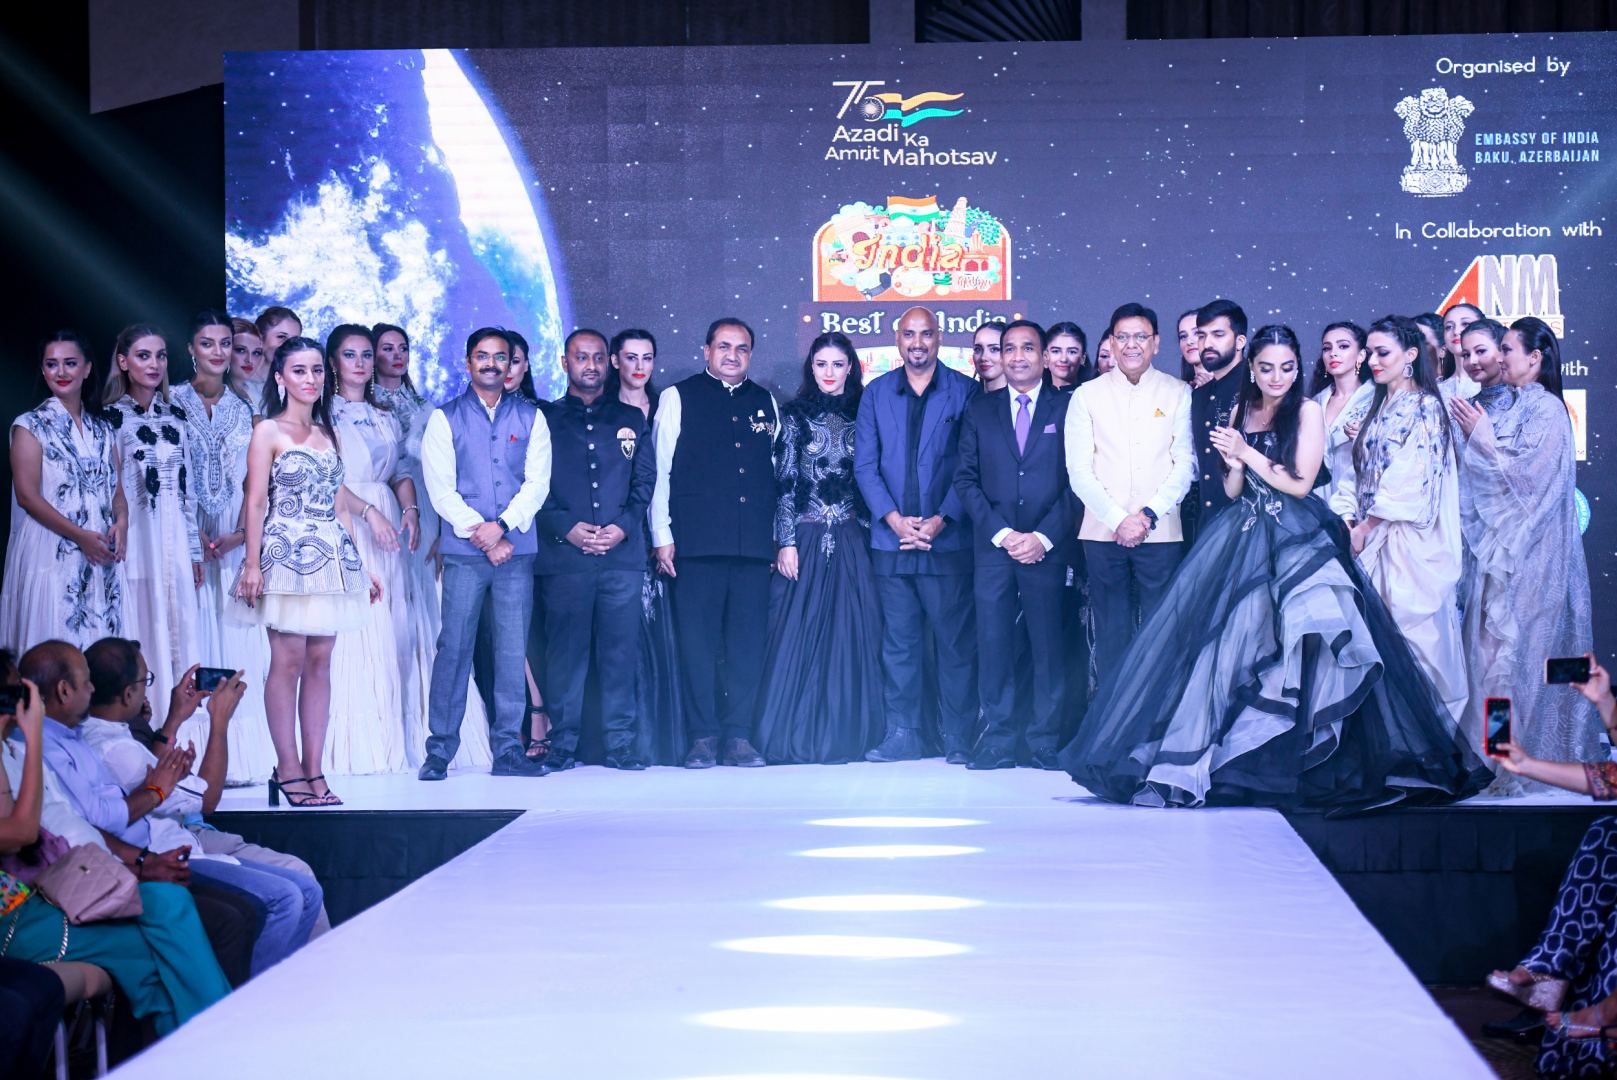 Embassy of India organises Exclusive Fashion Show presenting “Indian Creativity on the Ramp” (PHOTO)